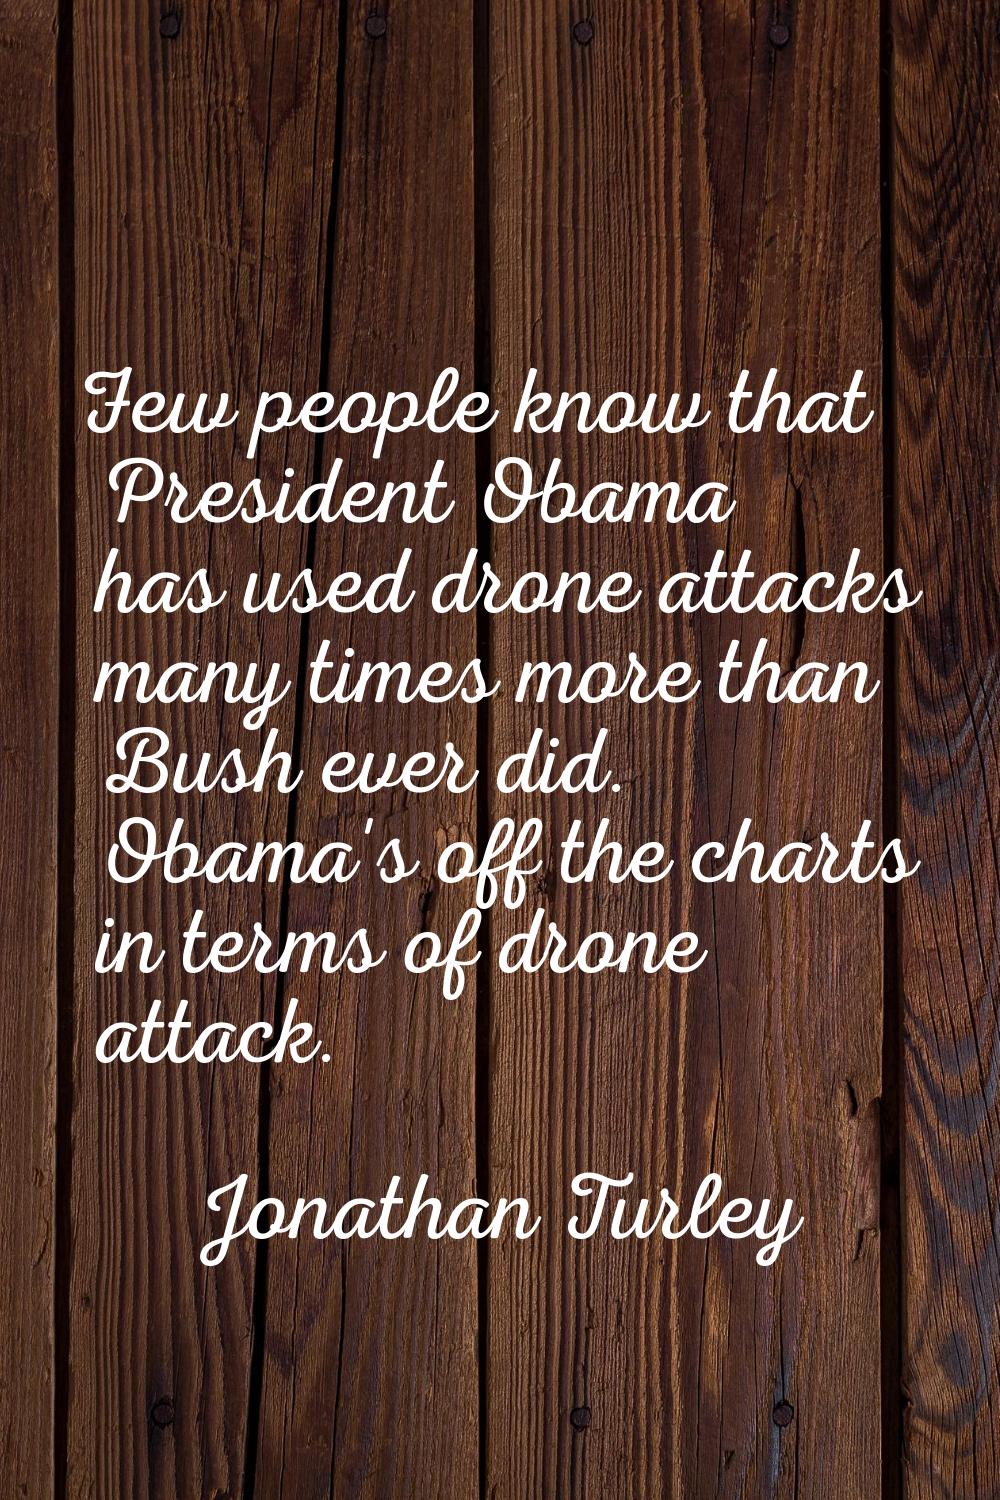 Few people know that President Obama has used drone attacks many times more than Bush ever did. Oba